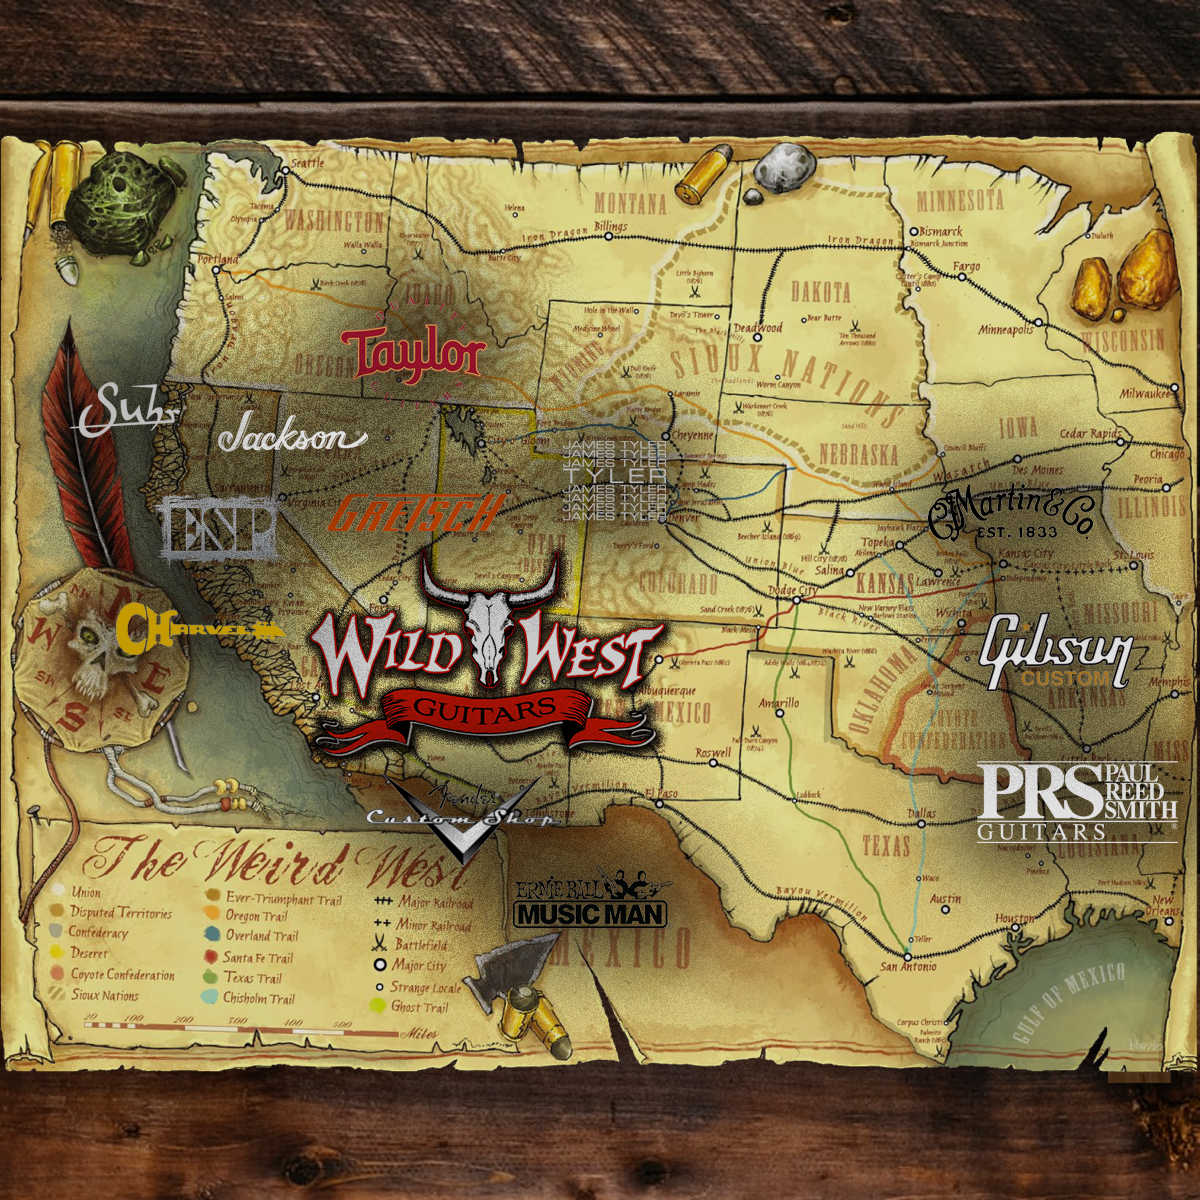 Wild West Guitars - Guitar Country